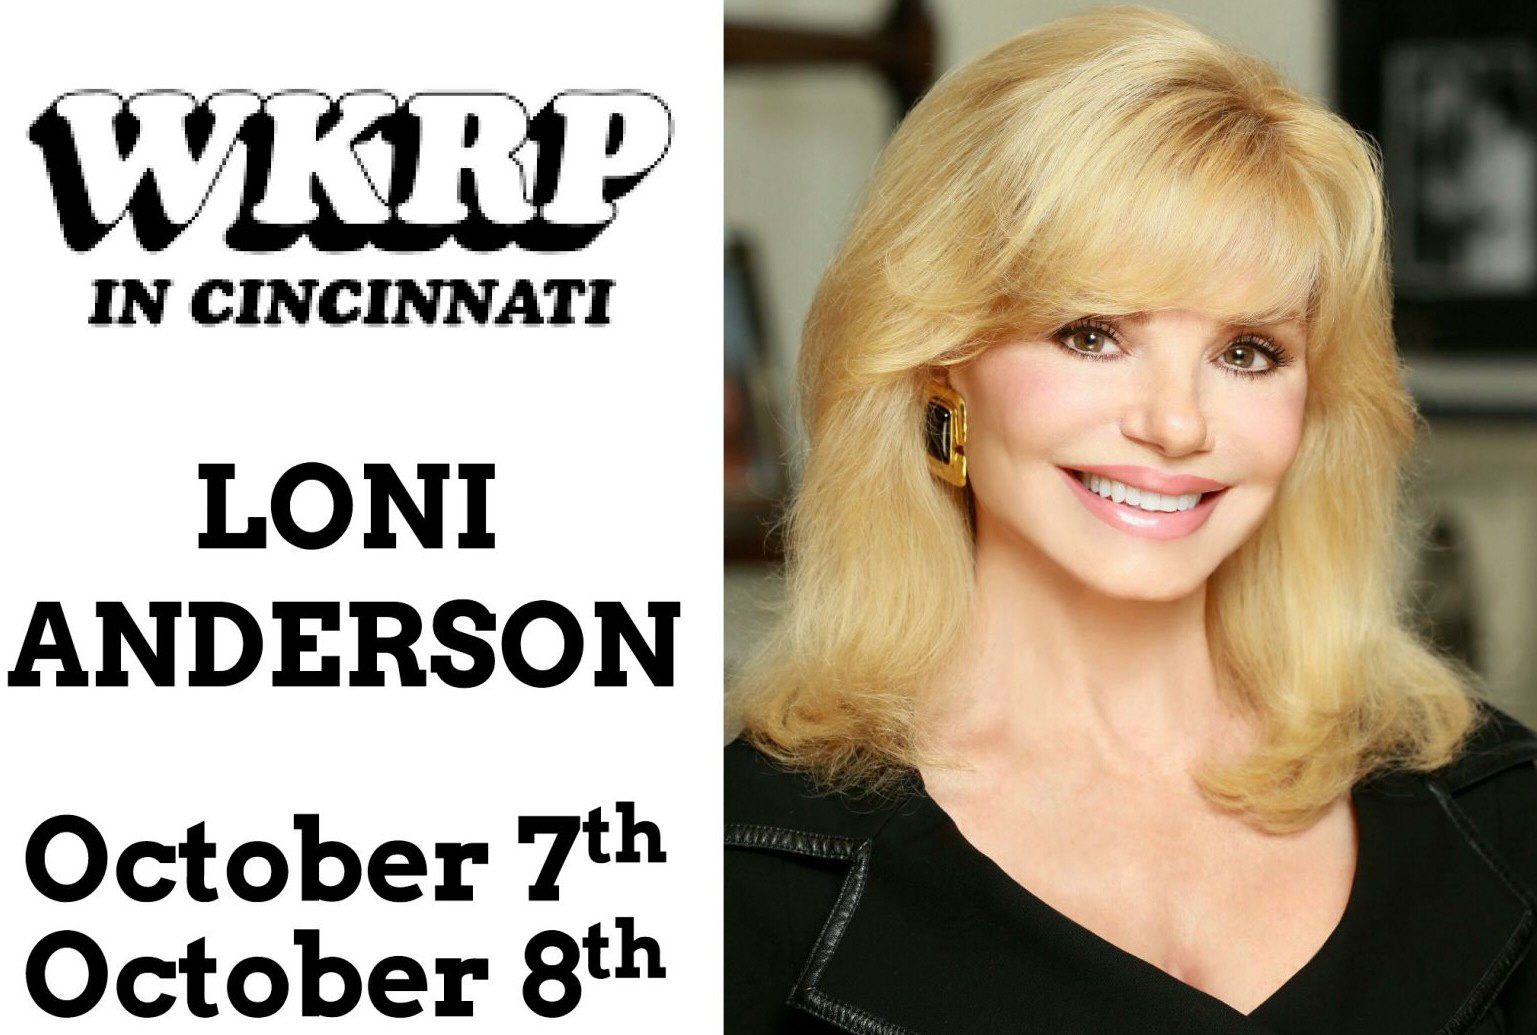 WKRP's Loni Anderson at 25th annual Endless Summer Cruisin October 7-8